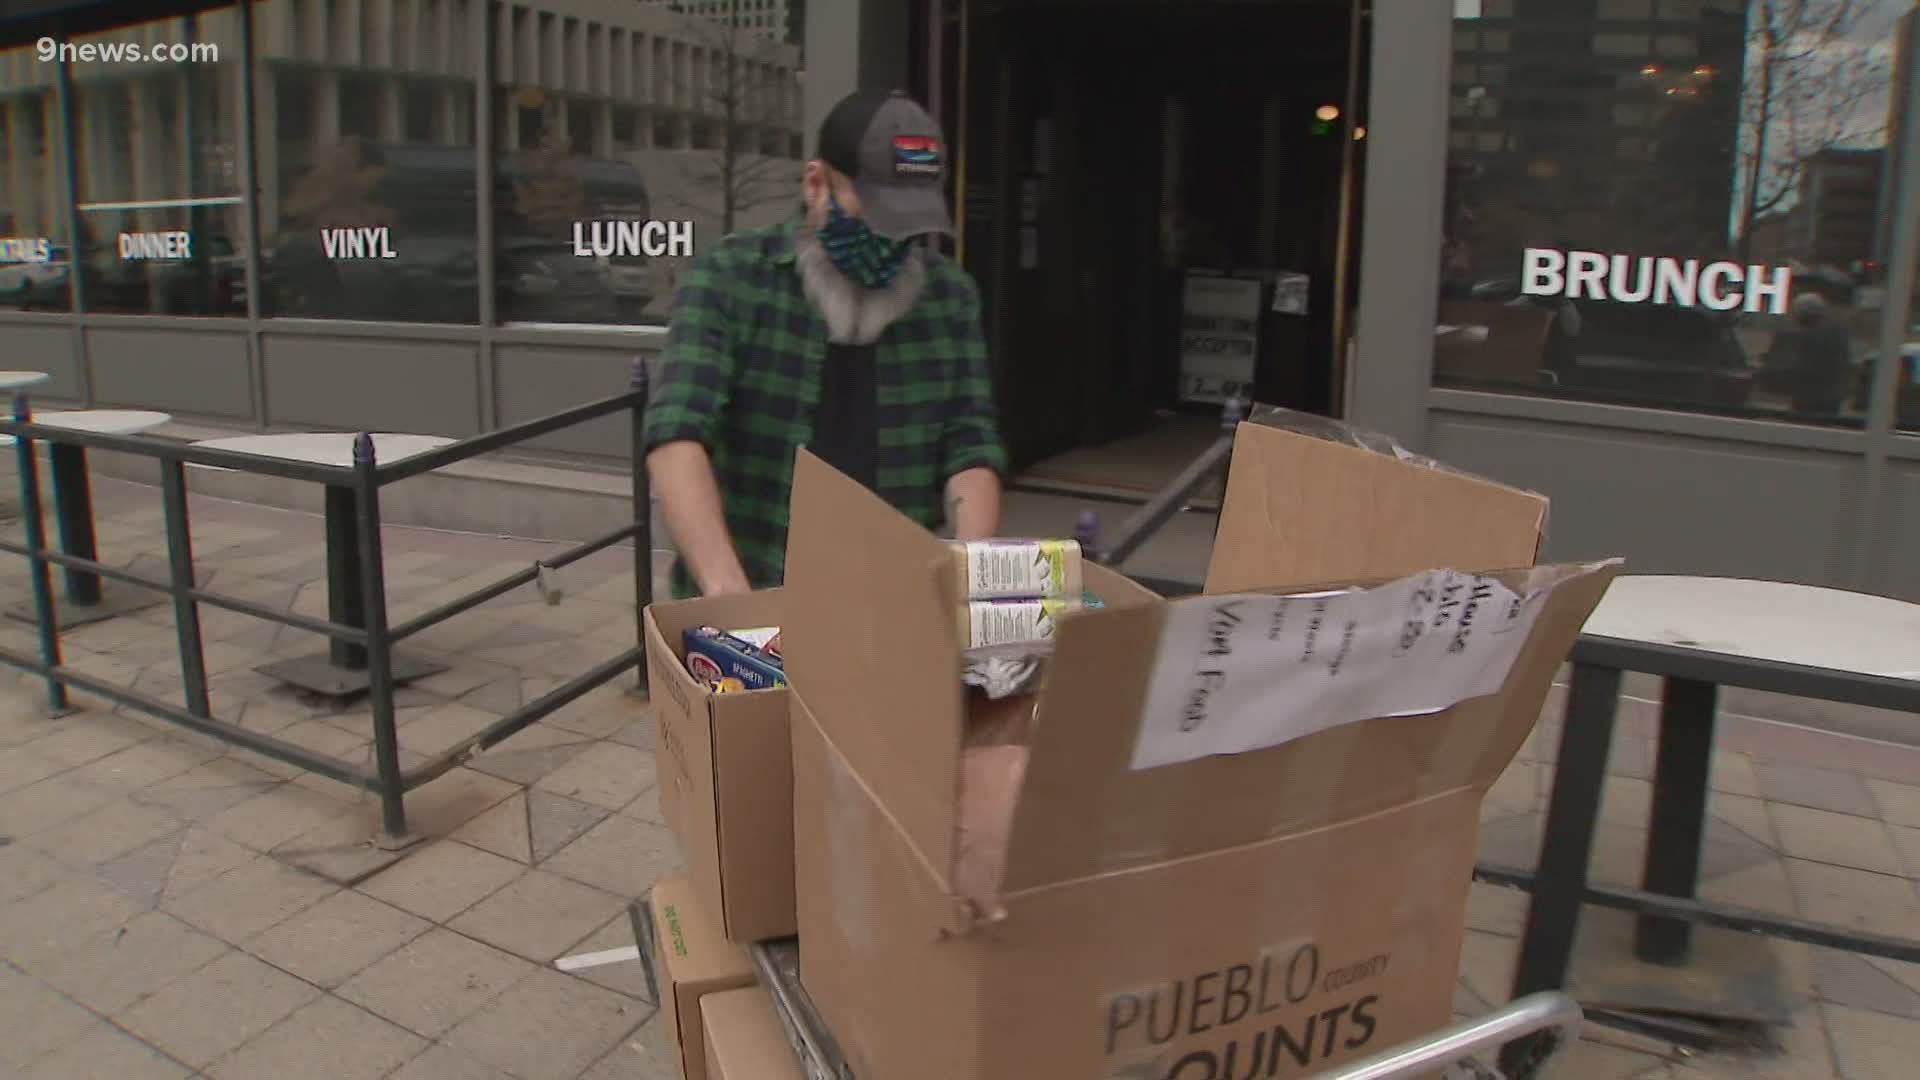 Along with virtual shows, Dazzle Denver is helping out musicians struggling during the pandemic with a food pantry.